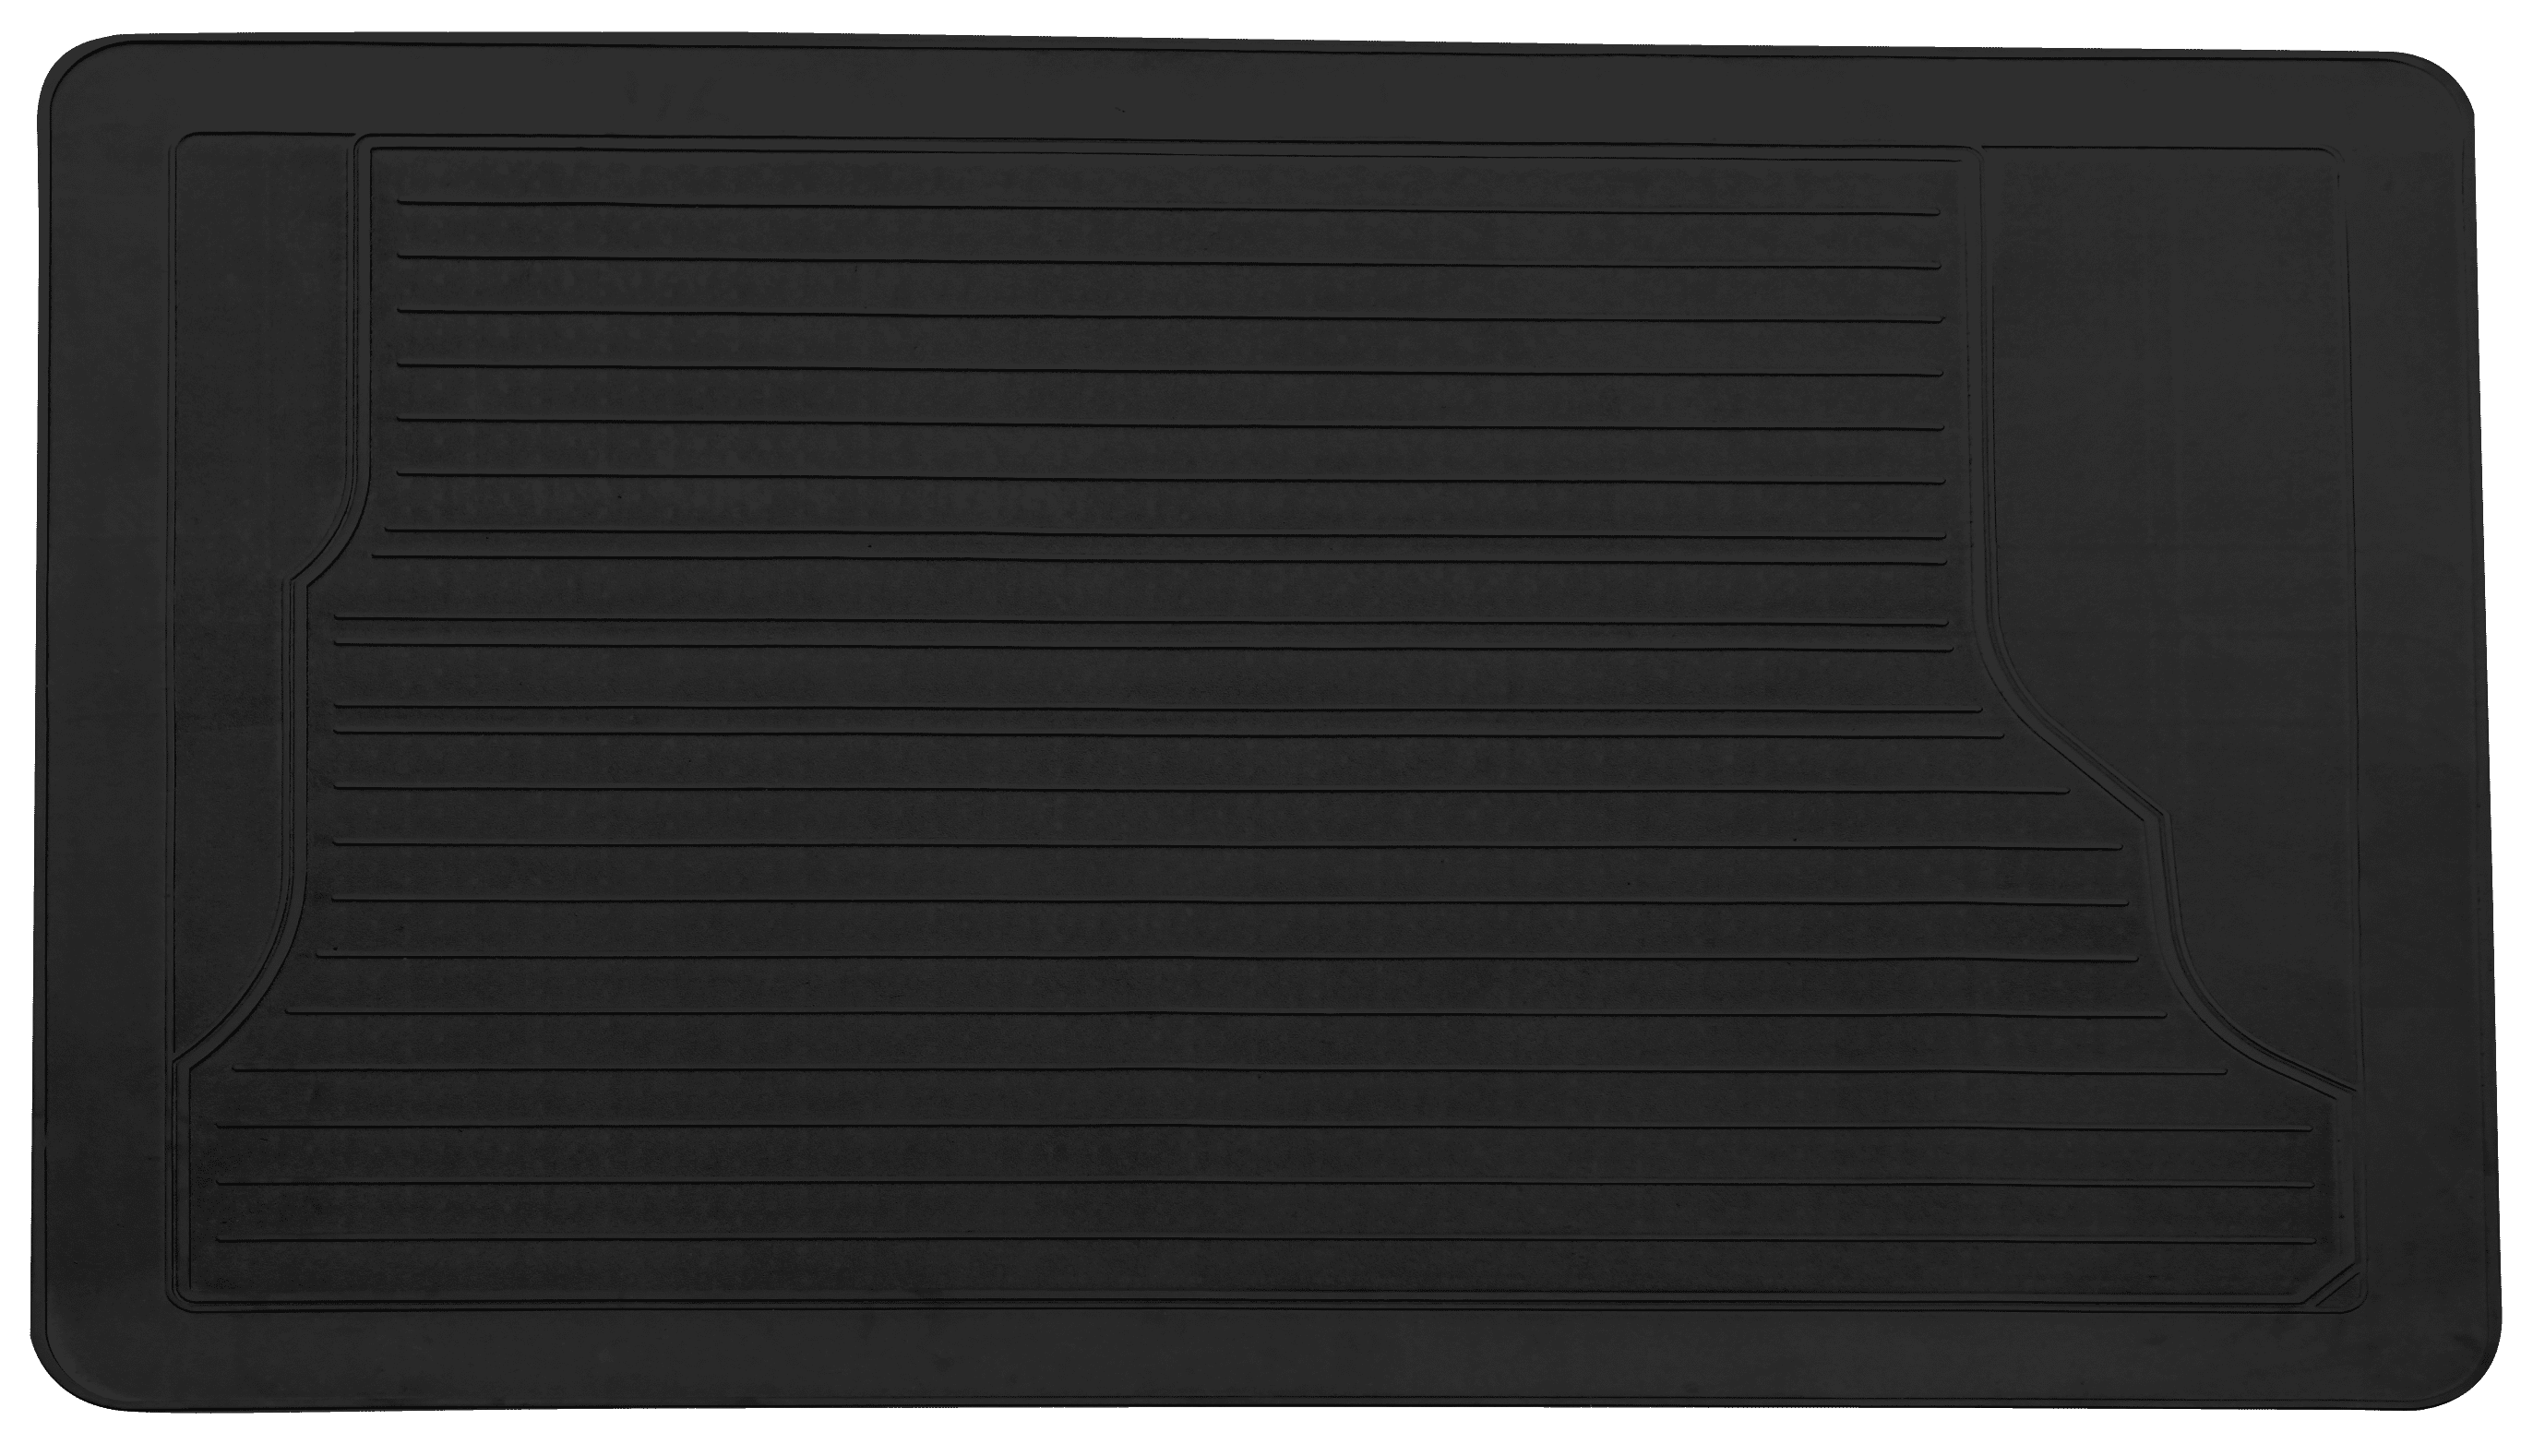 Black Diamond Plate Anti-Stain Grill and Garage Protective Mat Free Shipping NIB 